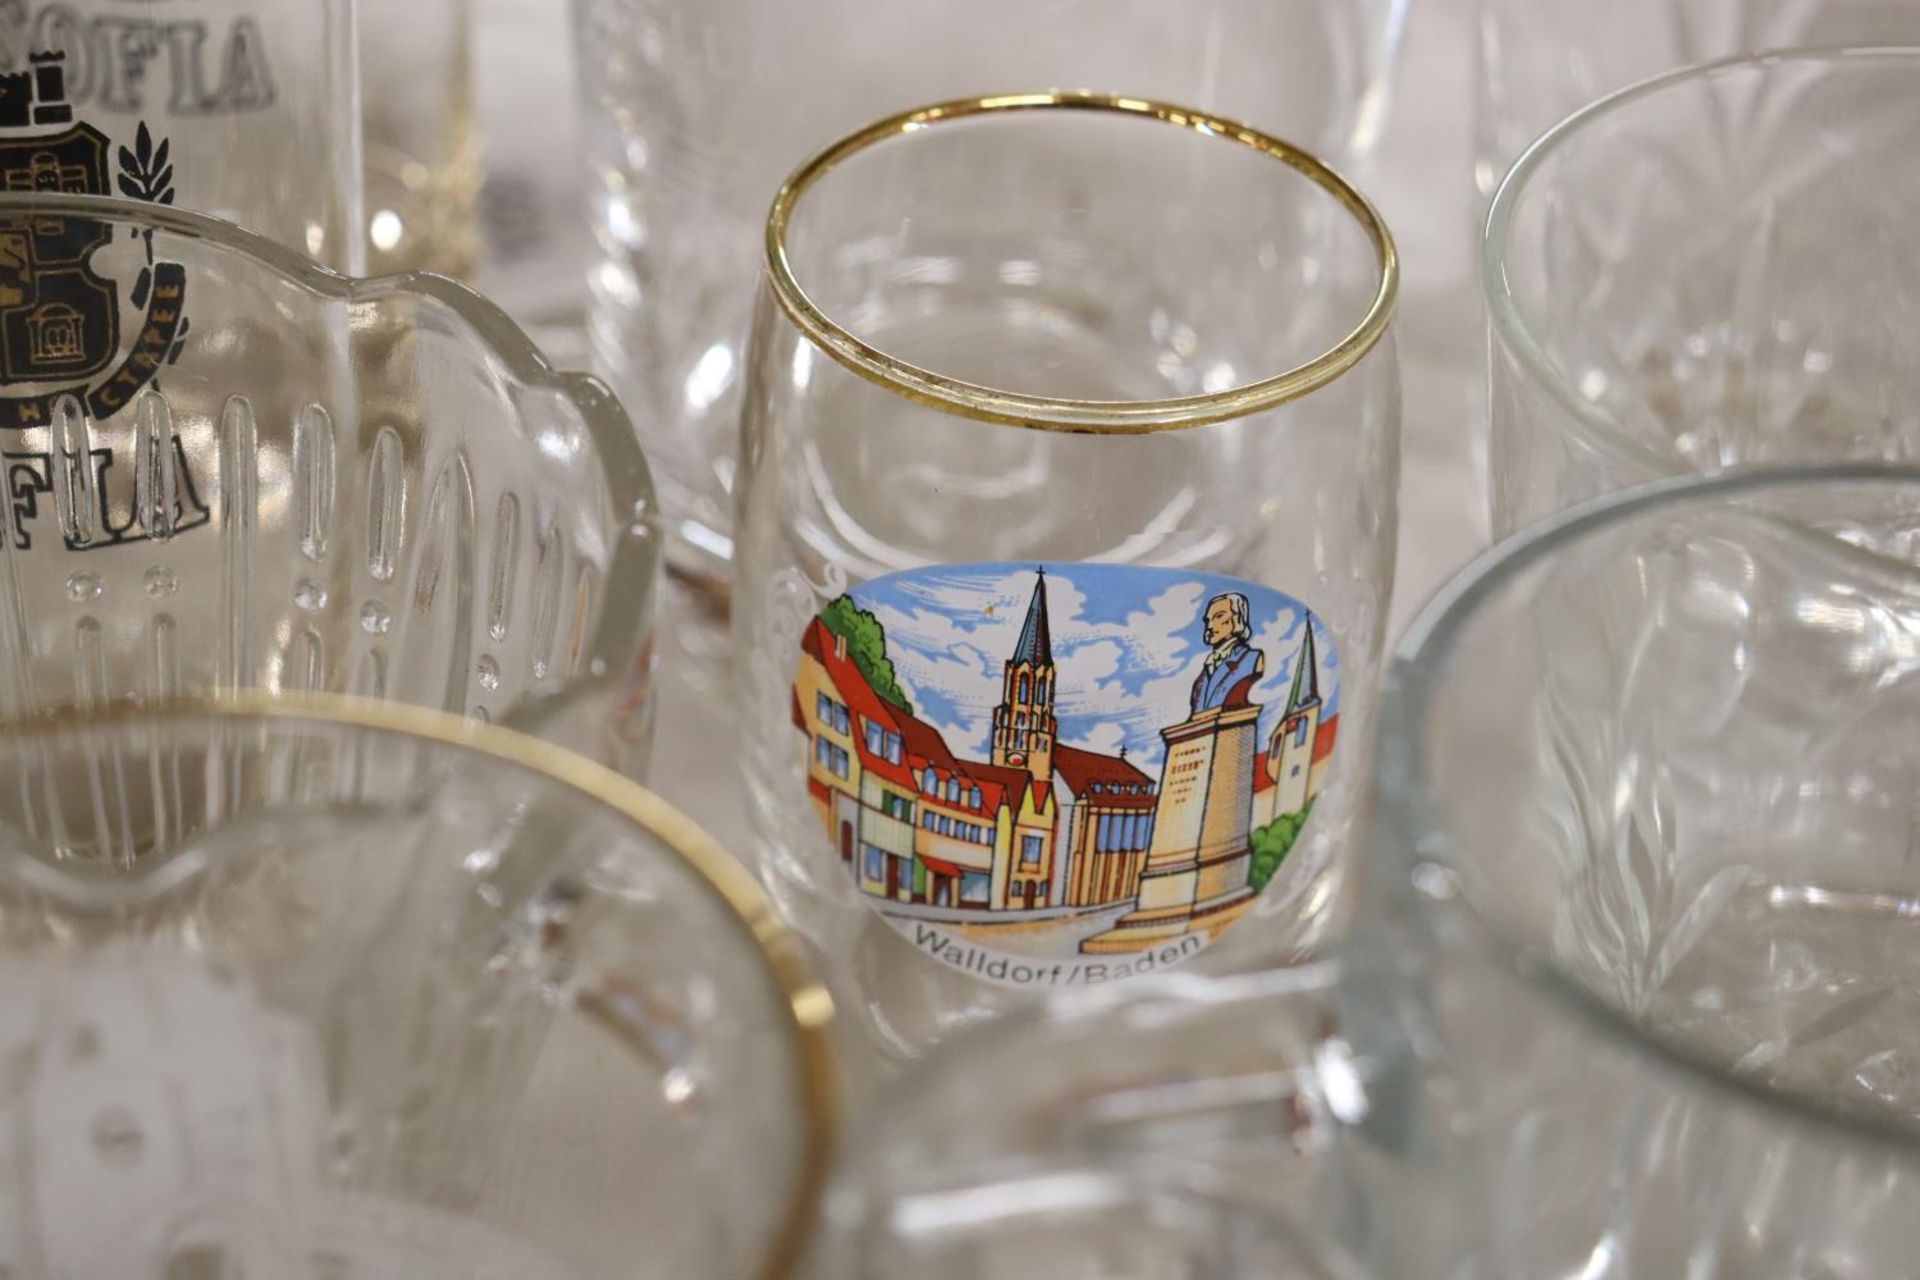 A COLLECTION OF HALF PINT, ADVERTISING, BEER TANKARDS - Image 6 of 8